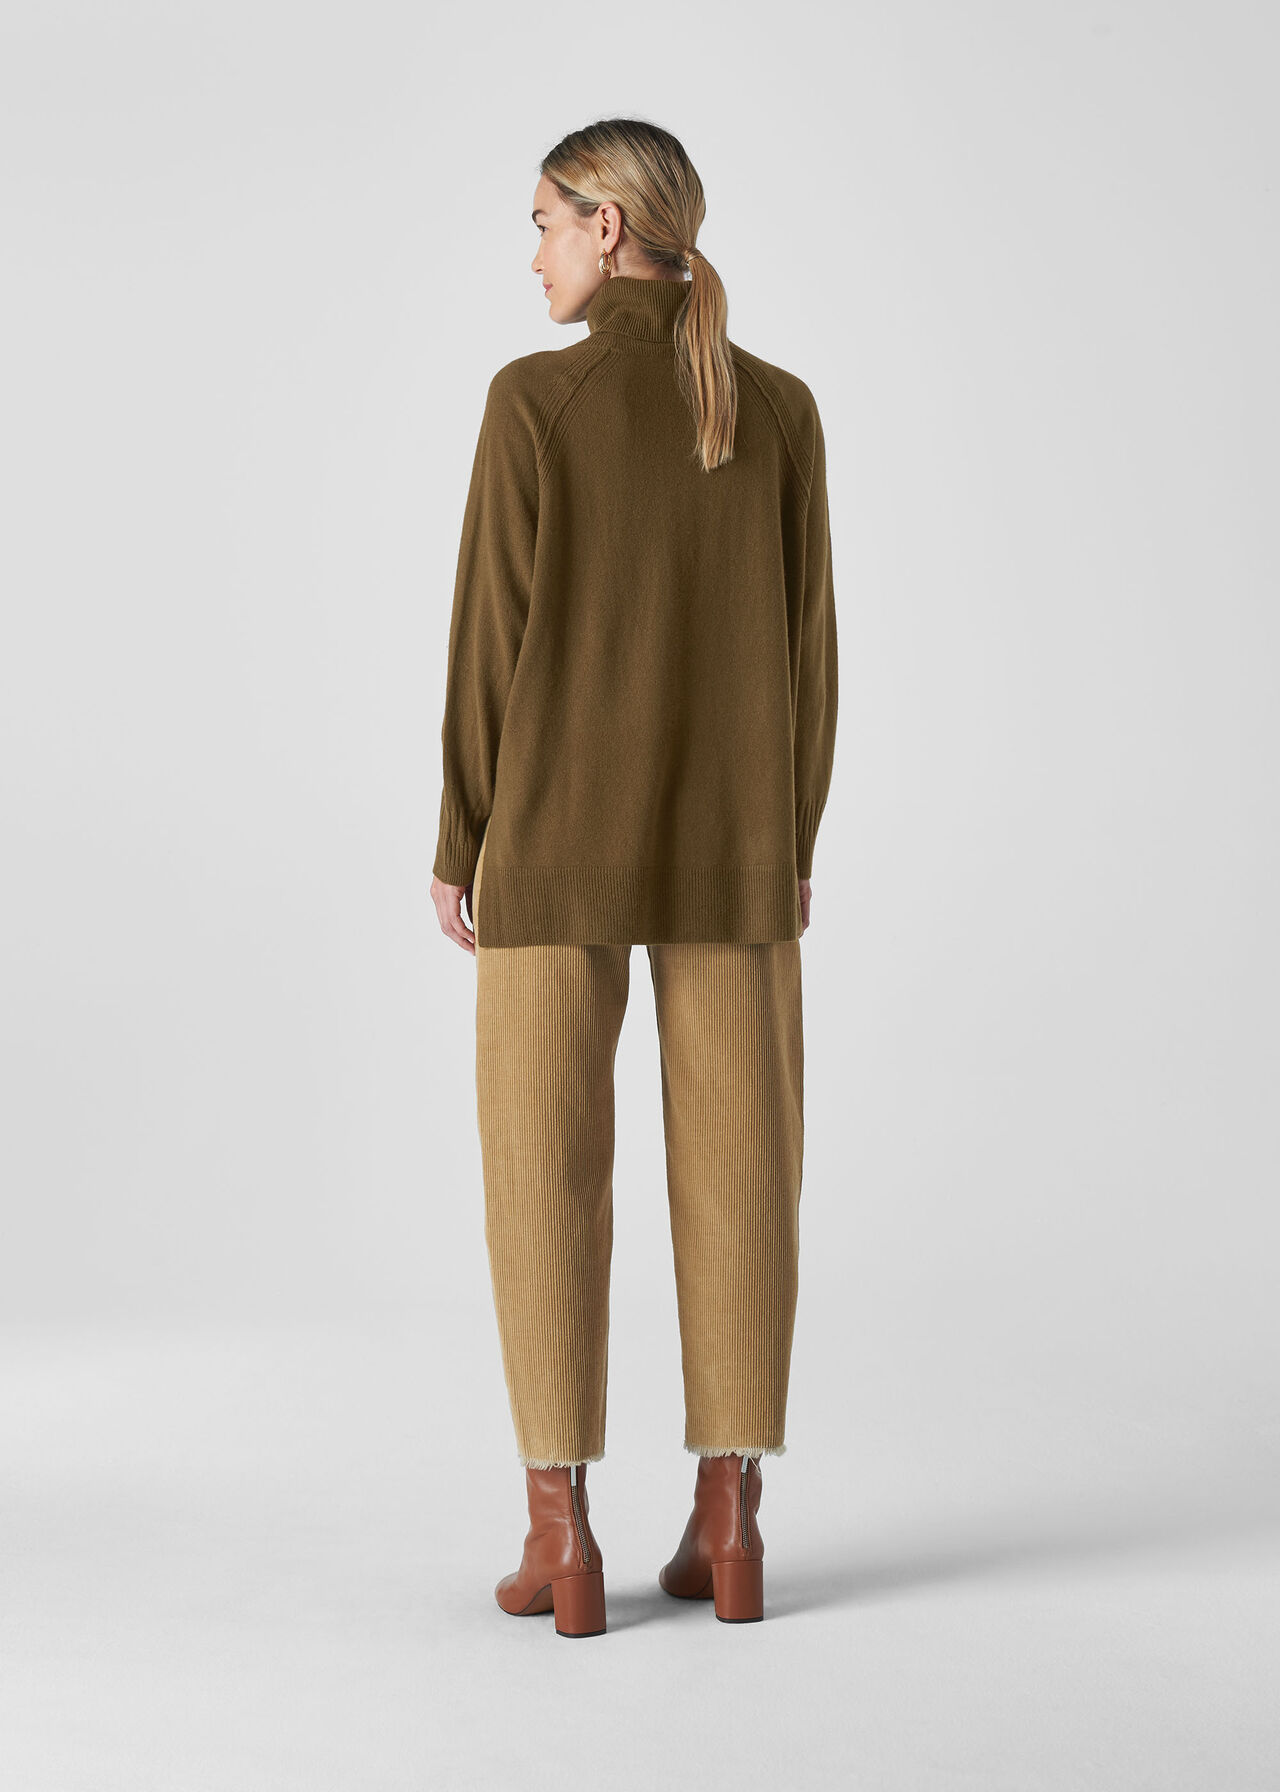 Olive Cashmere Roll Neck | WHISTLES